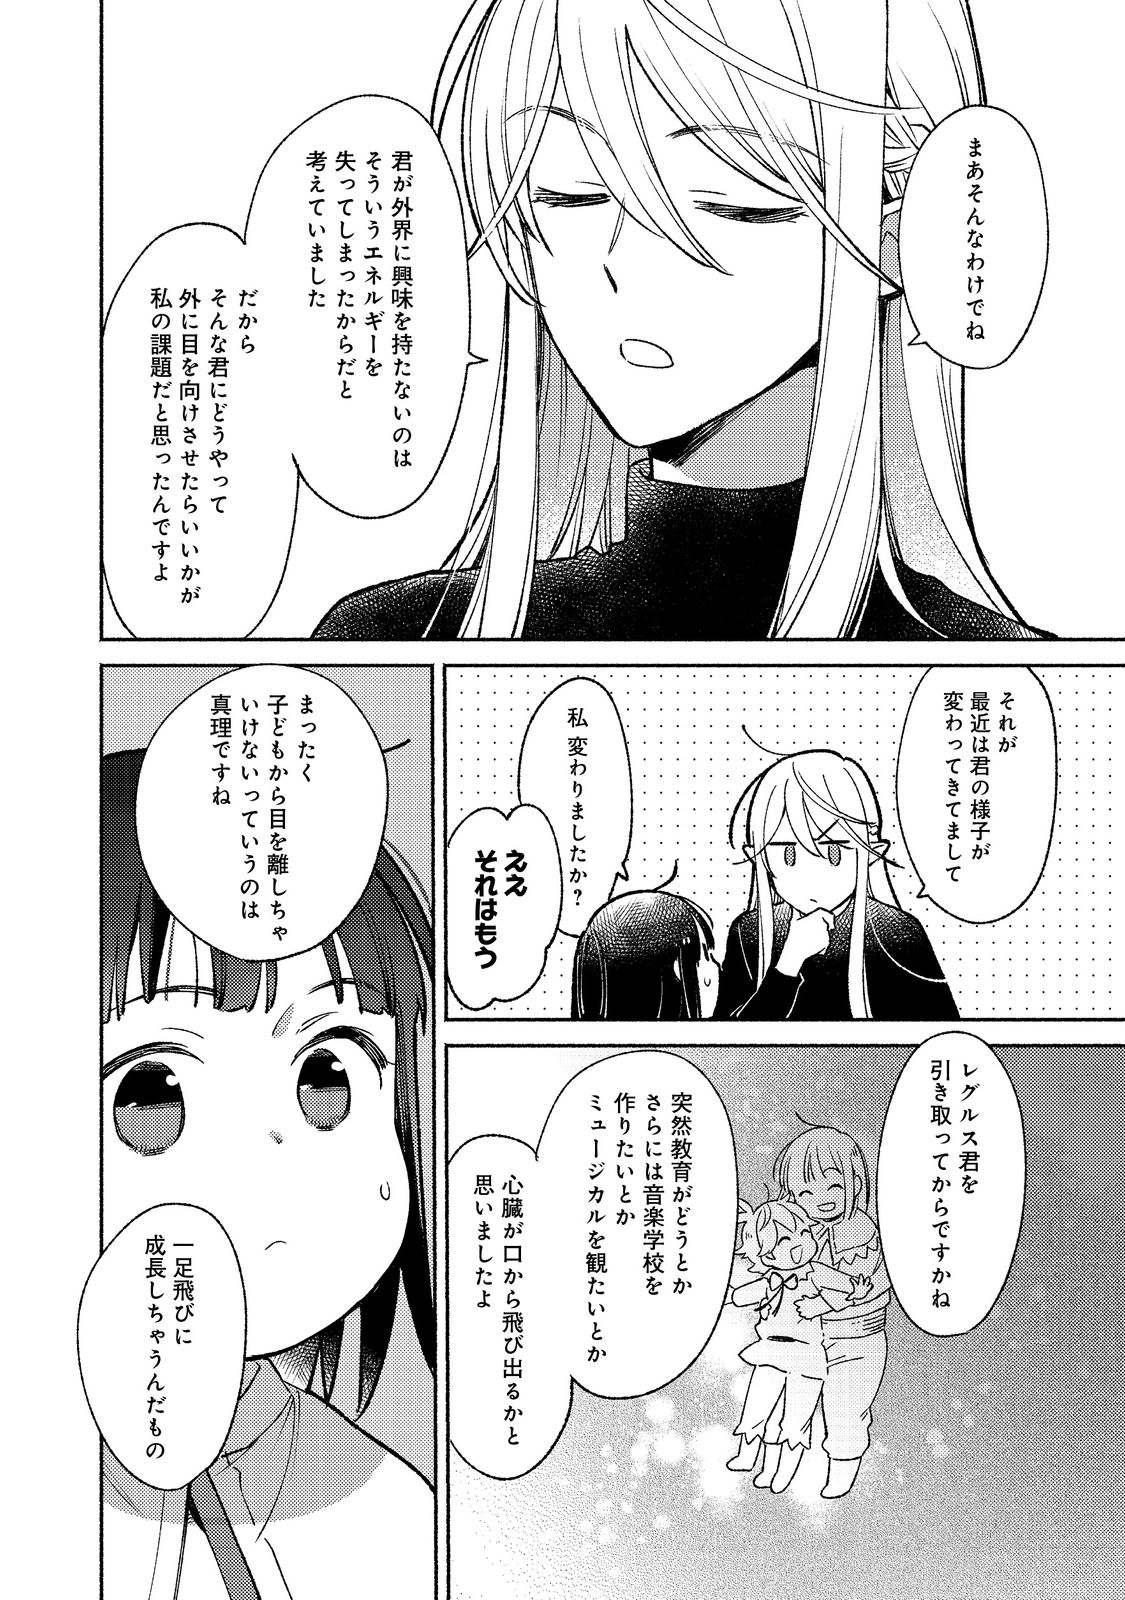 I’m the White Pig Nobleman 第16.2話 - Page 2